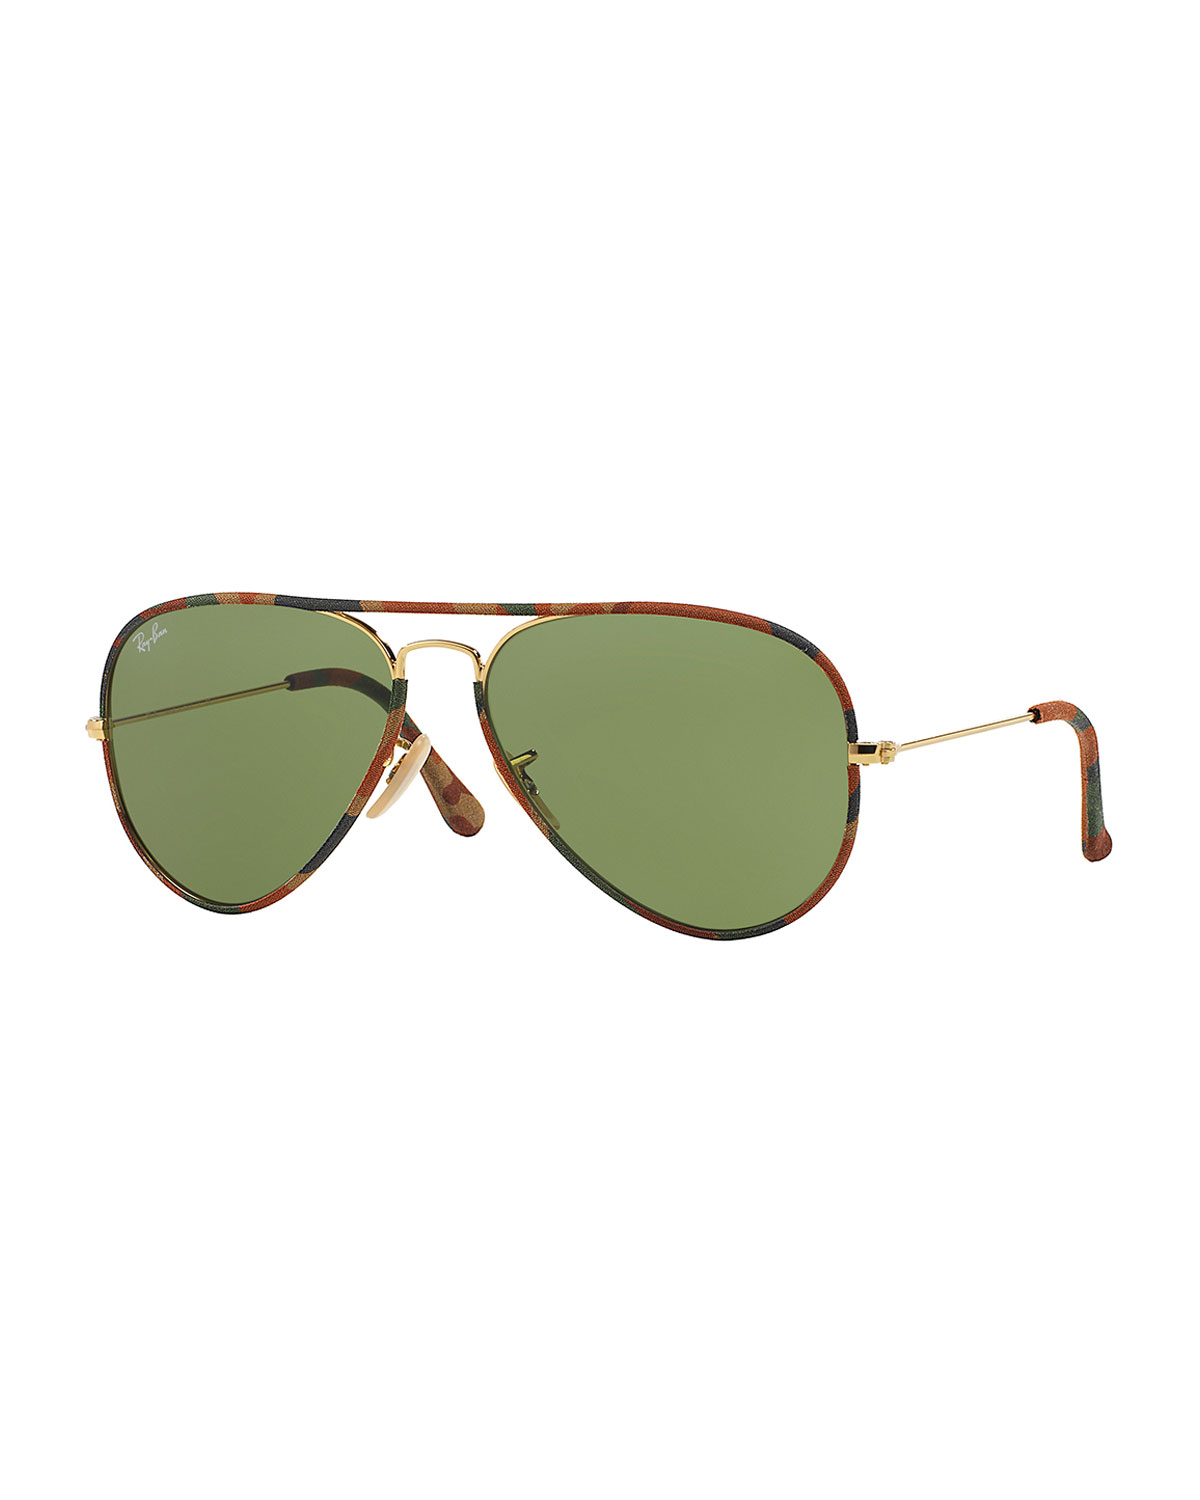 Ray Ban Original Aviator Sunglasses With Camouflage In Brown For Men Lyst 